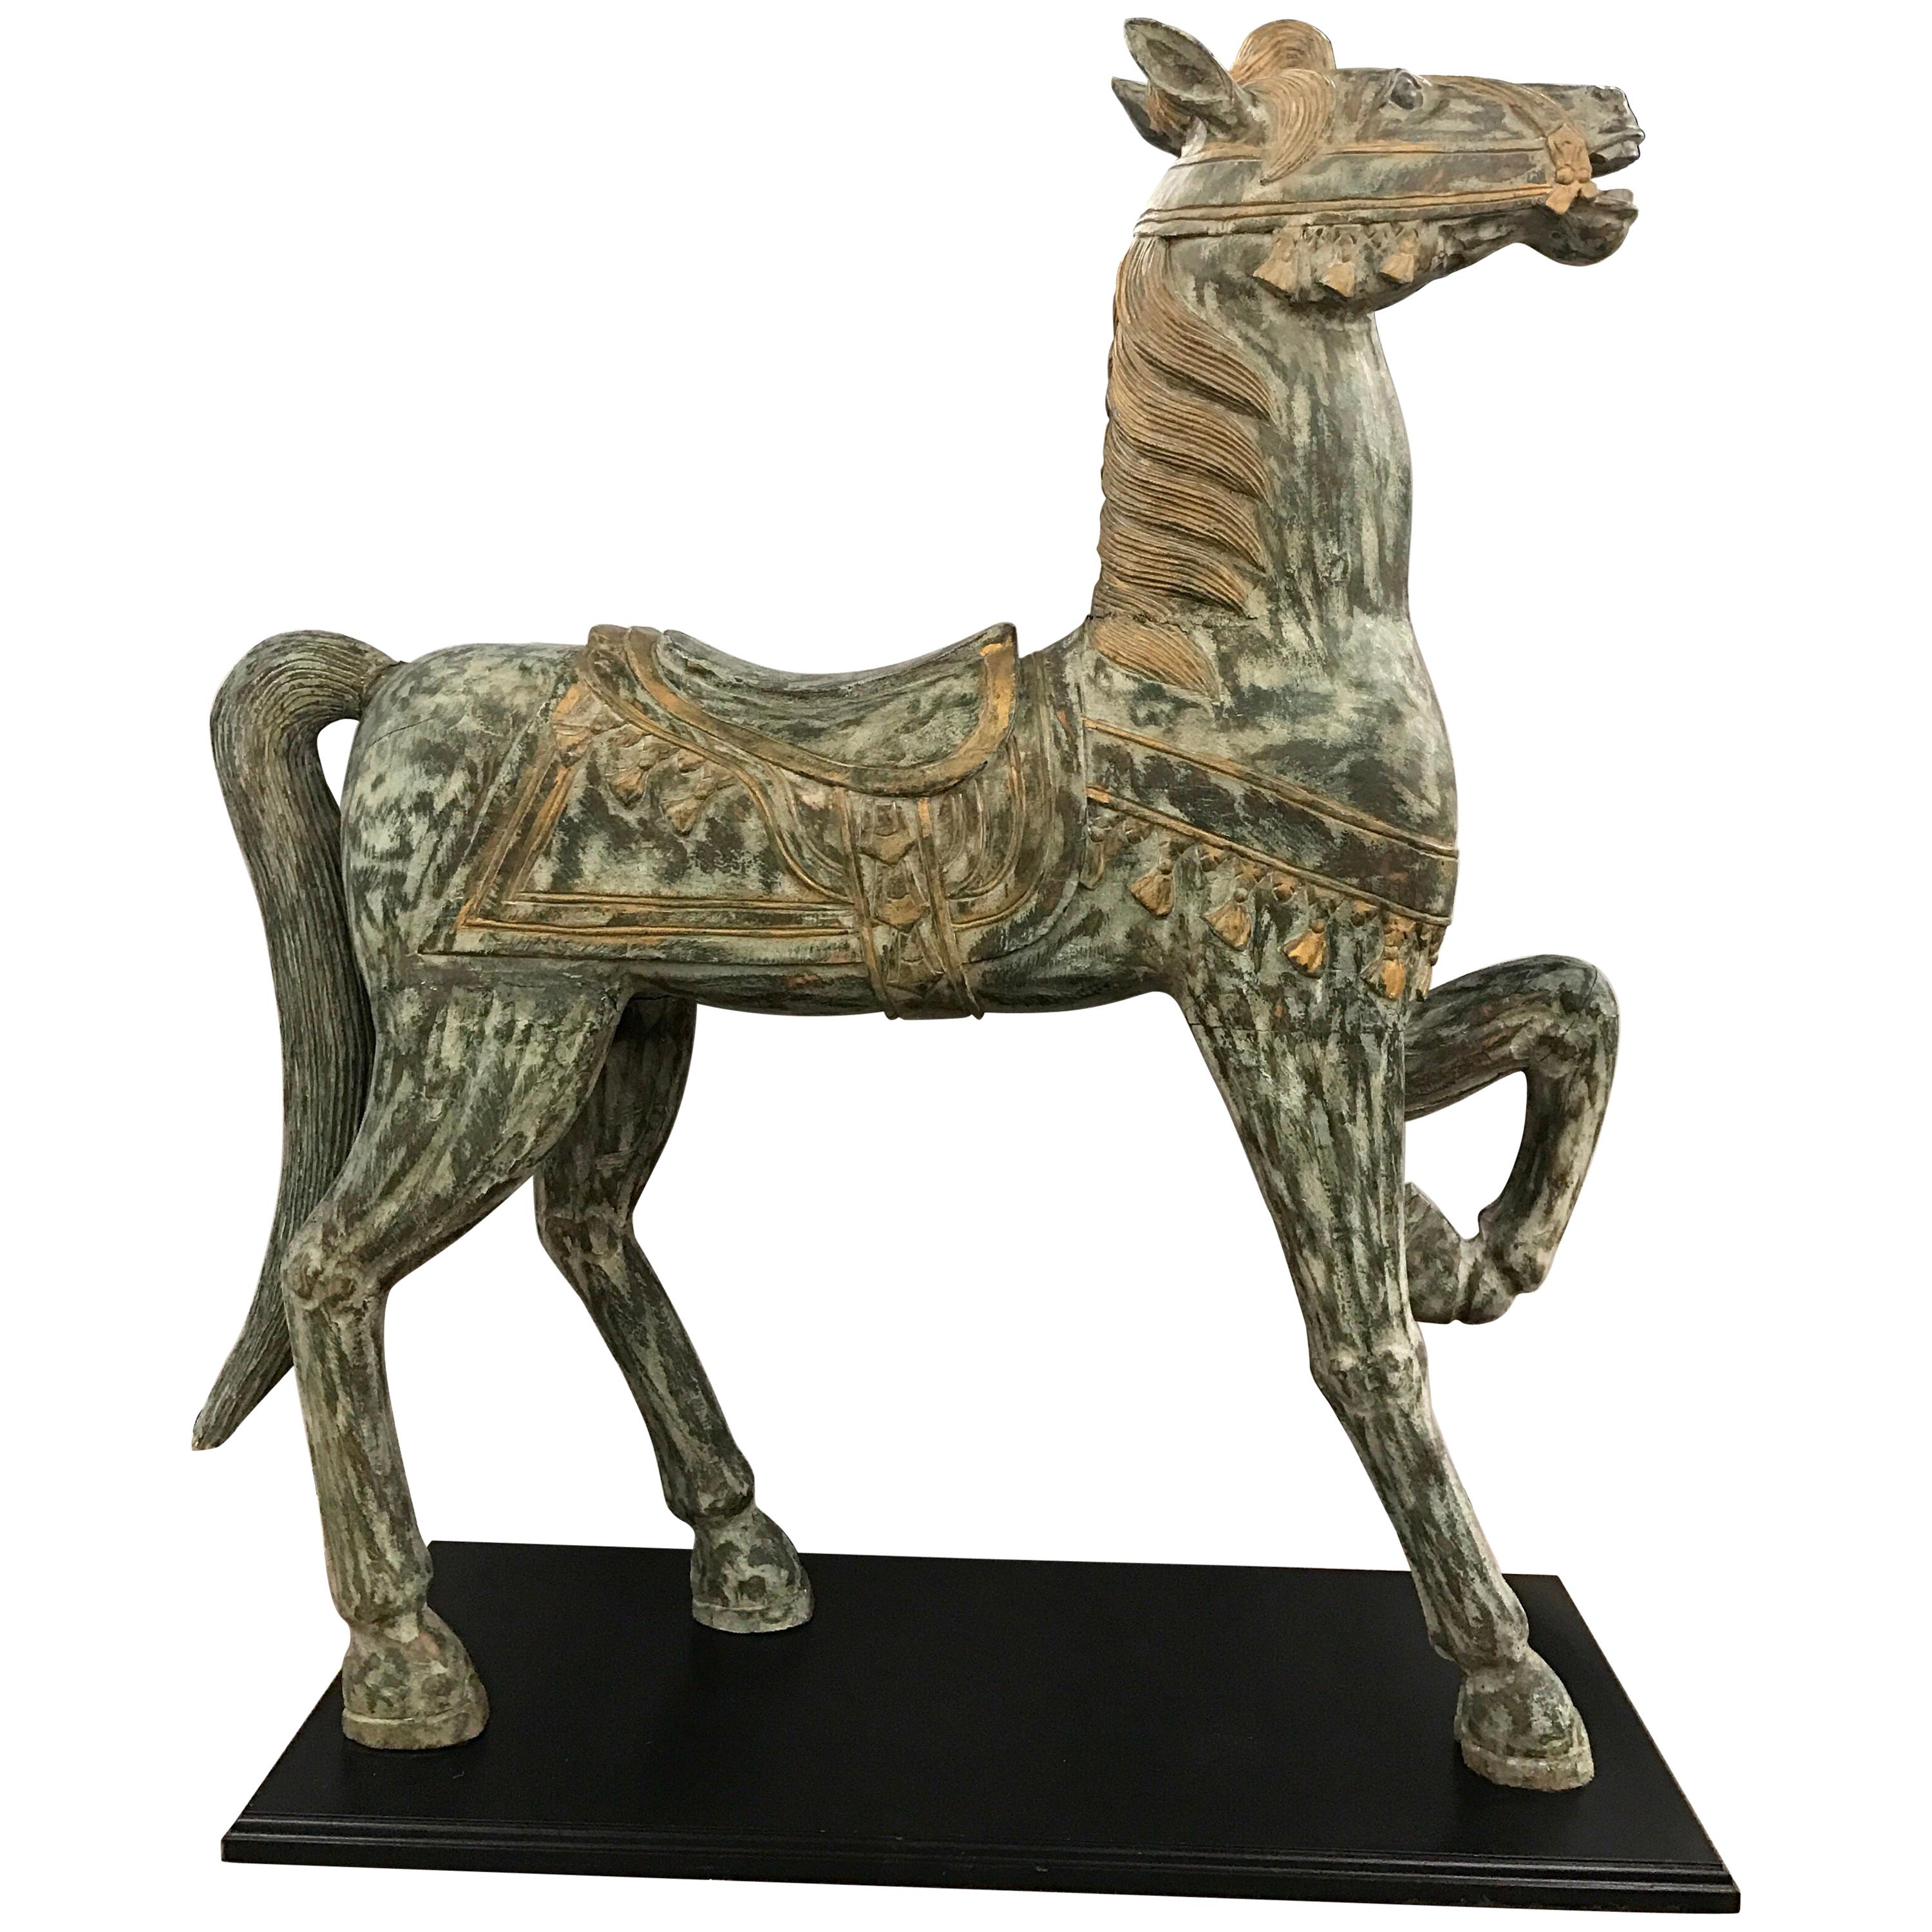 Large Hand-Painted Carved Prancing Horse Sculpture Equestrian Equine